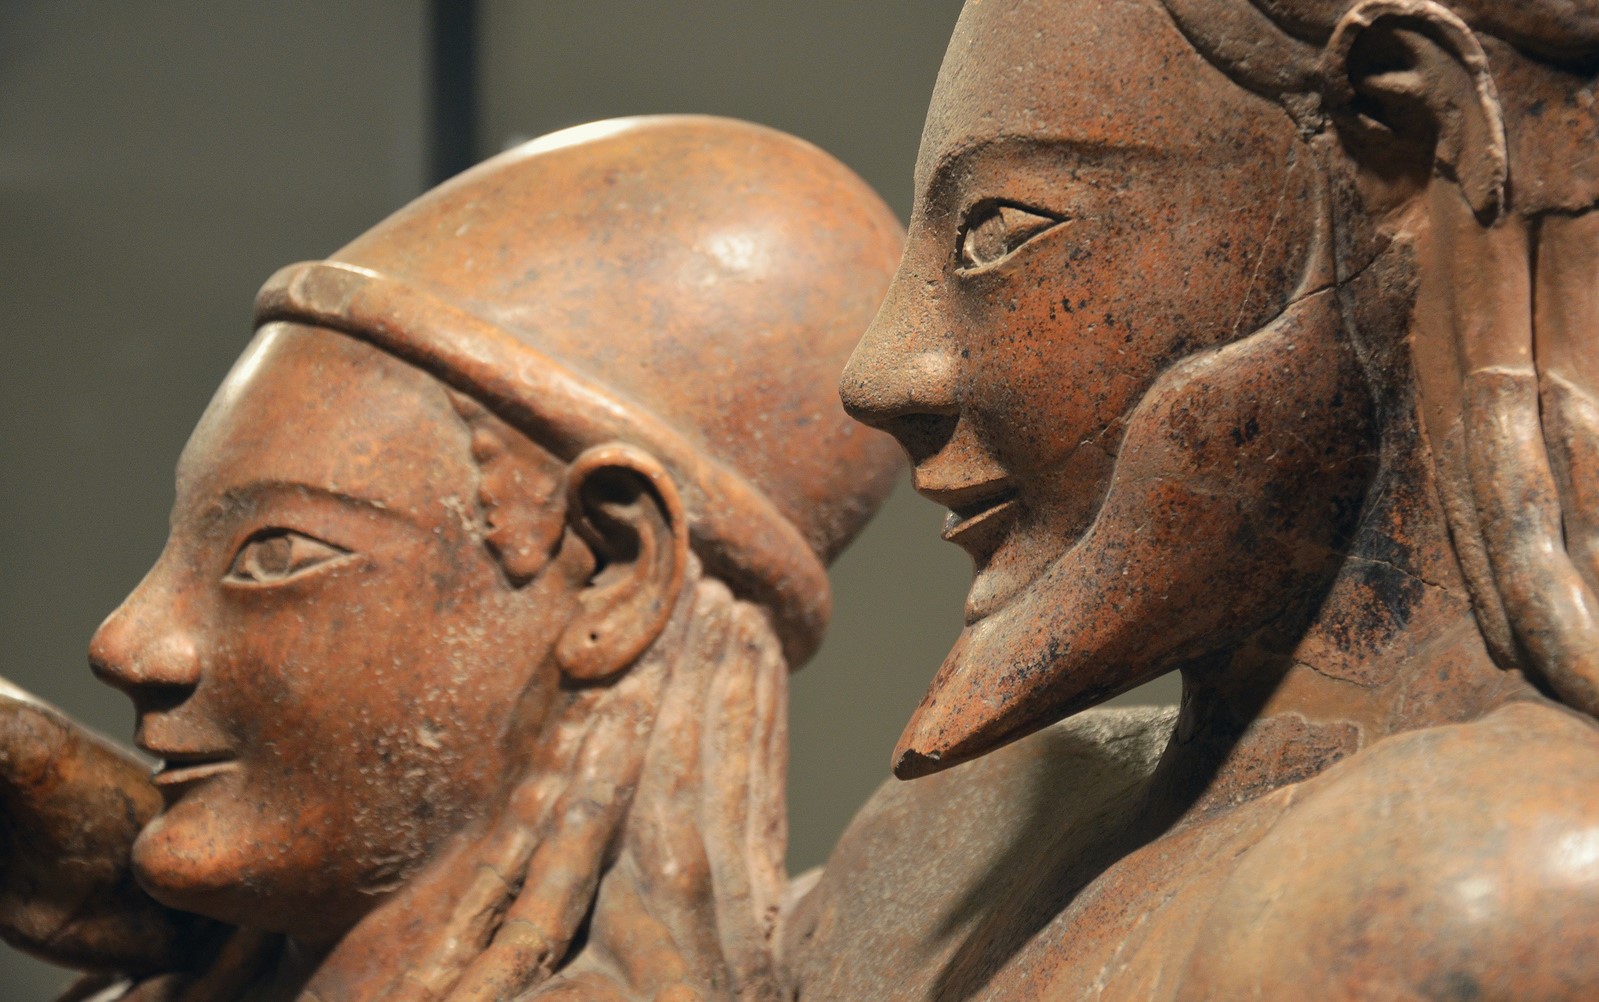 Part of the Etruscan Sarcophagus of the Spouses, one of the greatest pieces of art of the Etruscans. Credit: Carole Raddato / Flickr